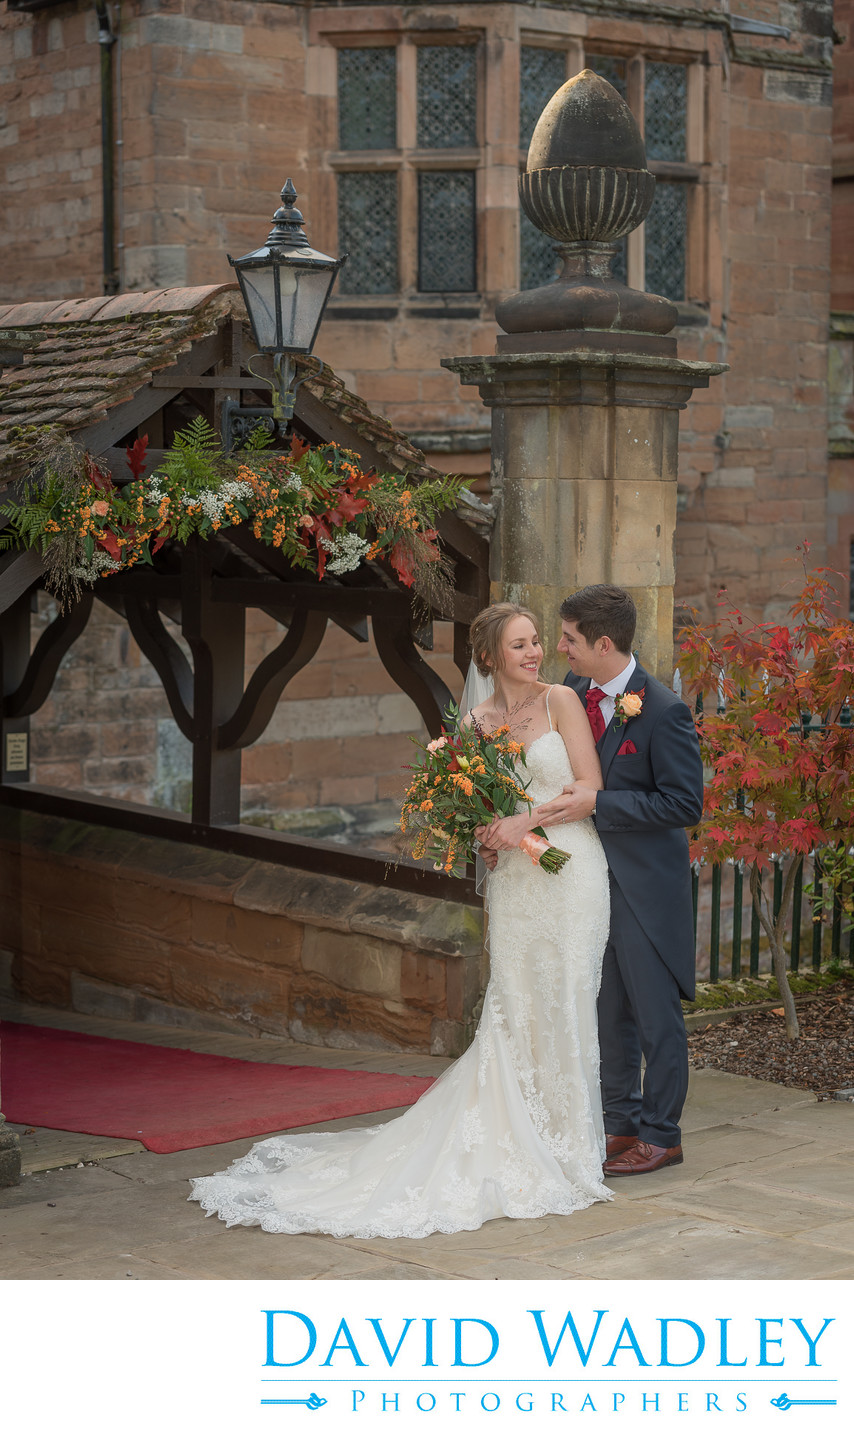 Bride & Groom photographed at front of New Hall Hotel in Sutton Coldfield.